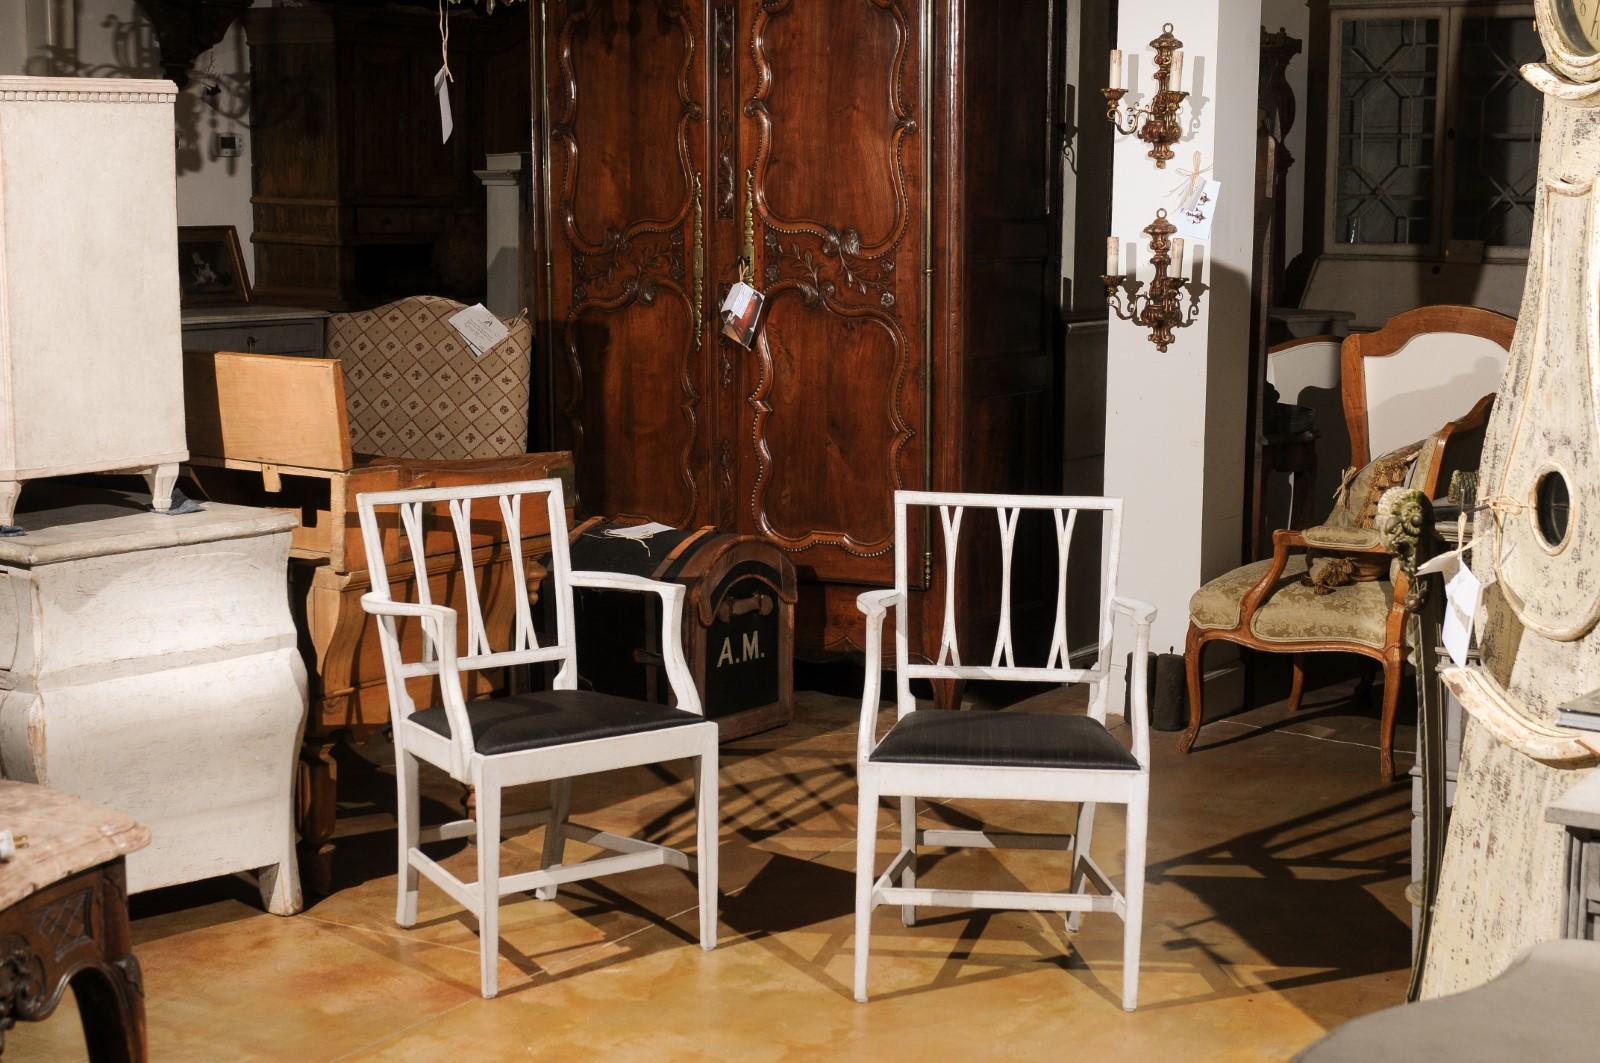 20th Century Pair of Swedish 1910s Painted Wood Armchairs with Carved Splats and Stretchers